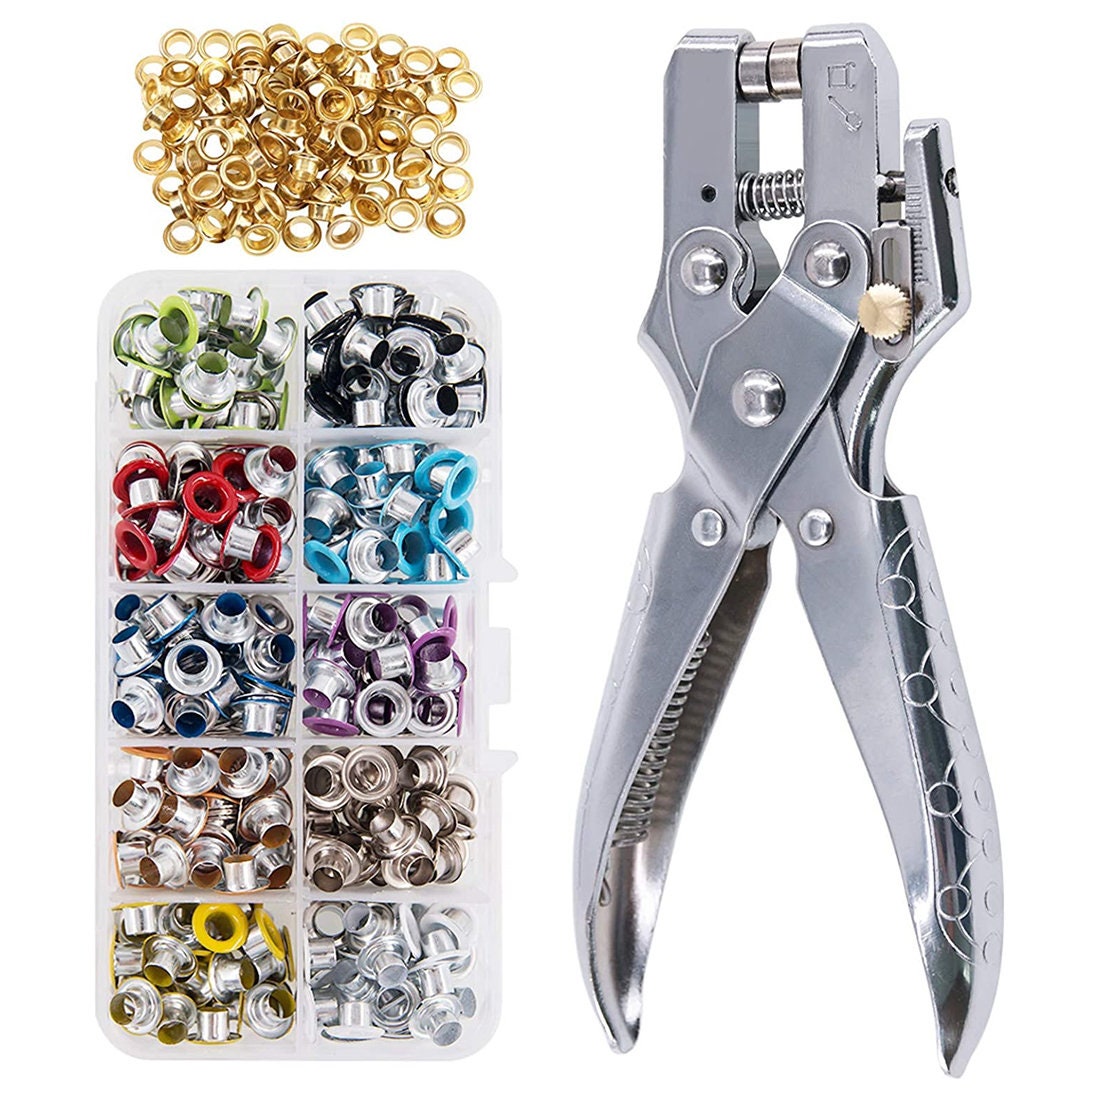 500Pcs 1/2 Inch Grommet Tool Kit Leather Hole Punch Pliers